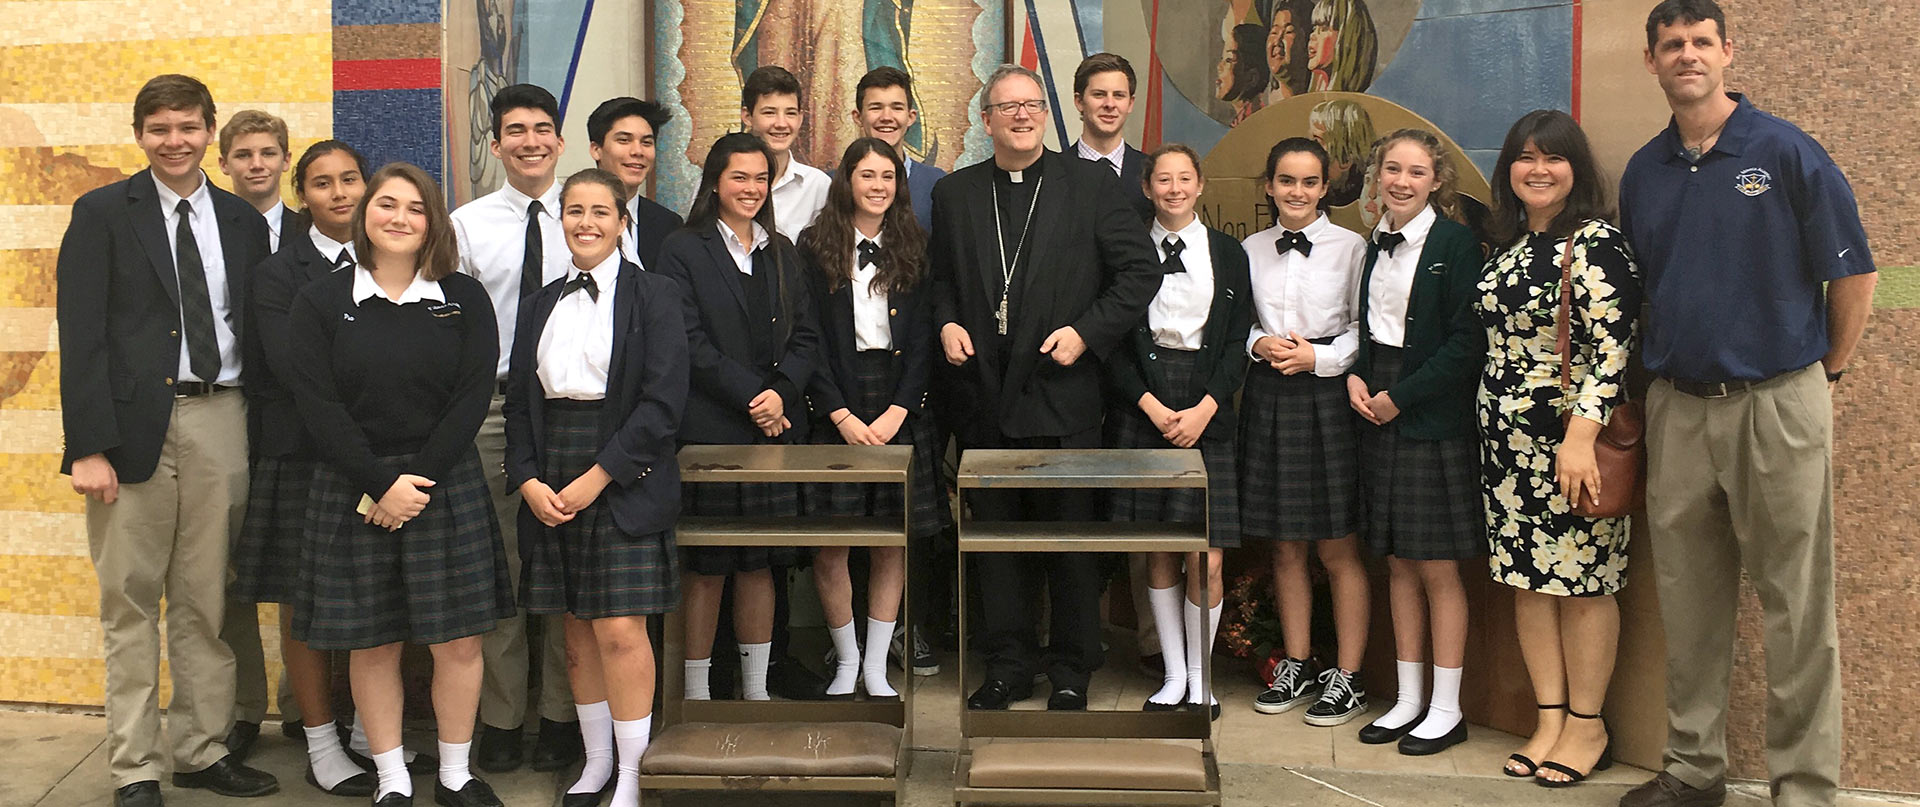 St. Monica Academy at the Cathedral of Our Lady of the Angels